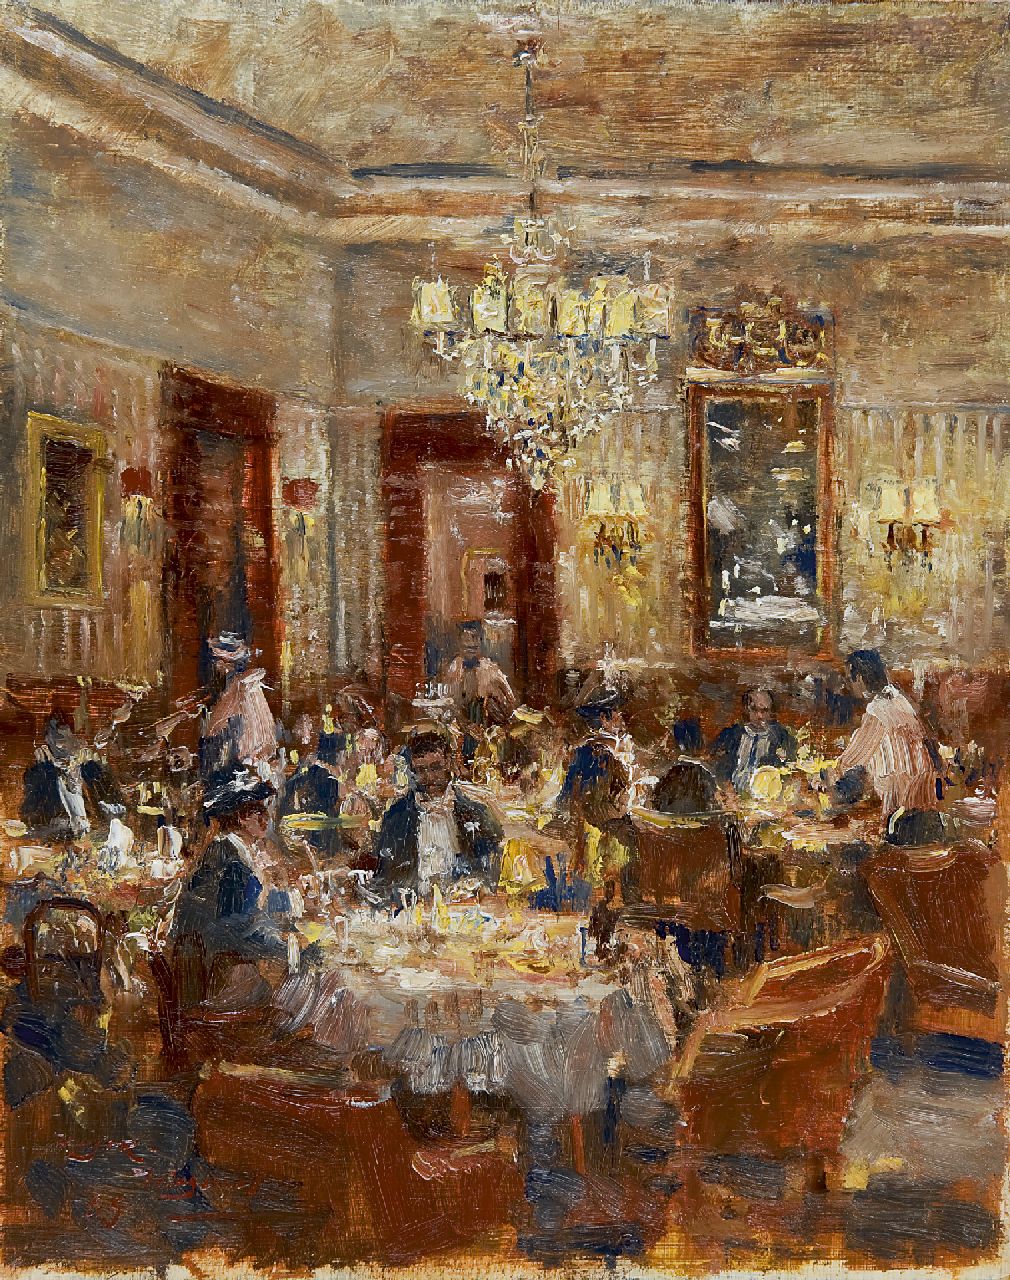 Meyer-Wiegand R.D.  | Rolf Dieter Meyer-Wiegand, A festive evening at the restaurant, oil on panel 30.0 x 23.9 cm, signed l.l.